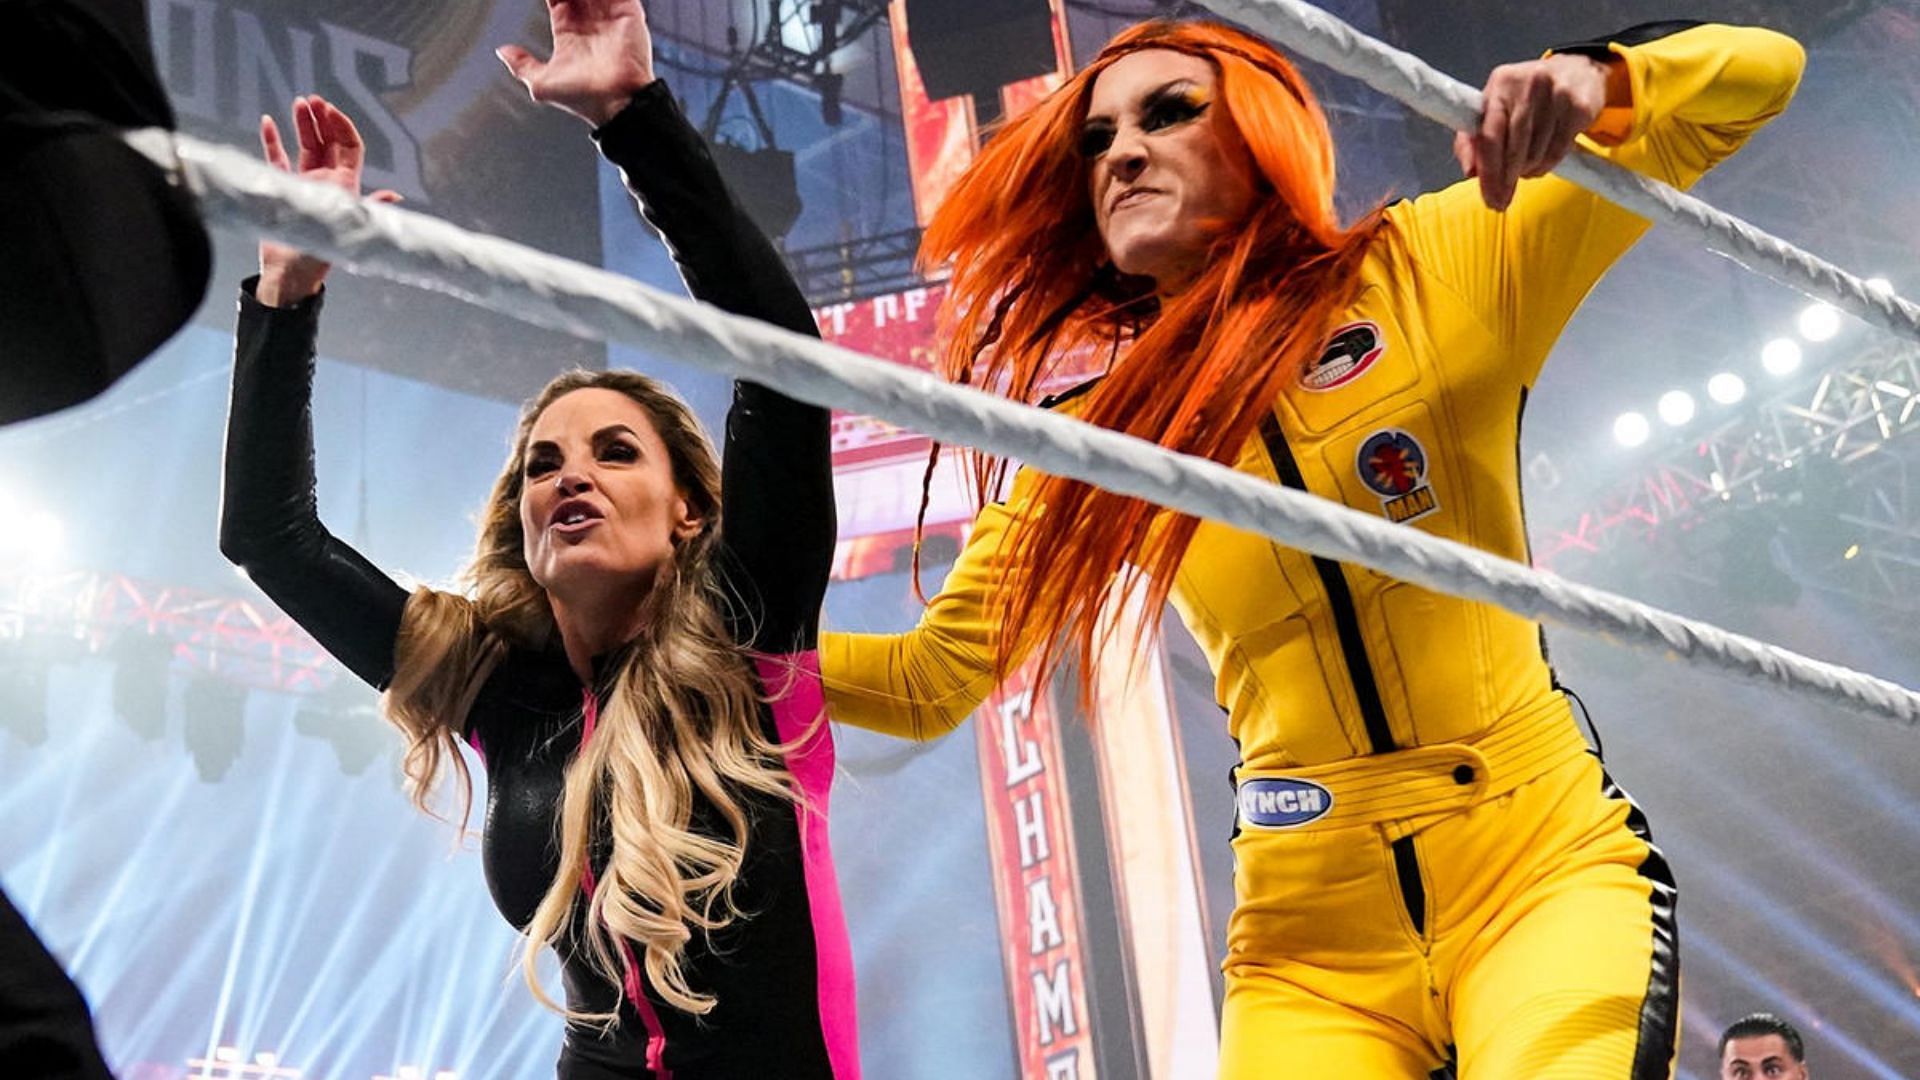 Trish Stratus reposts picture of her and Becky Lynch trending on